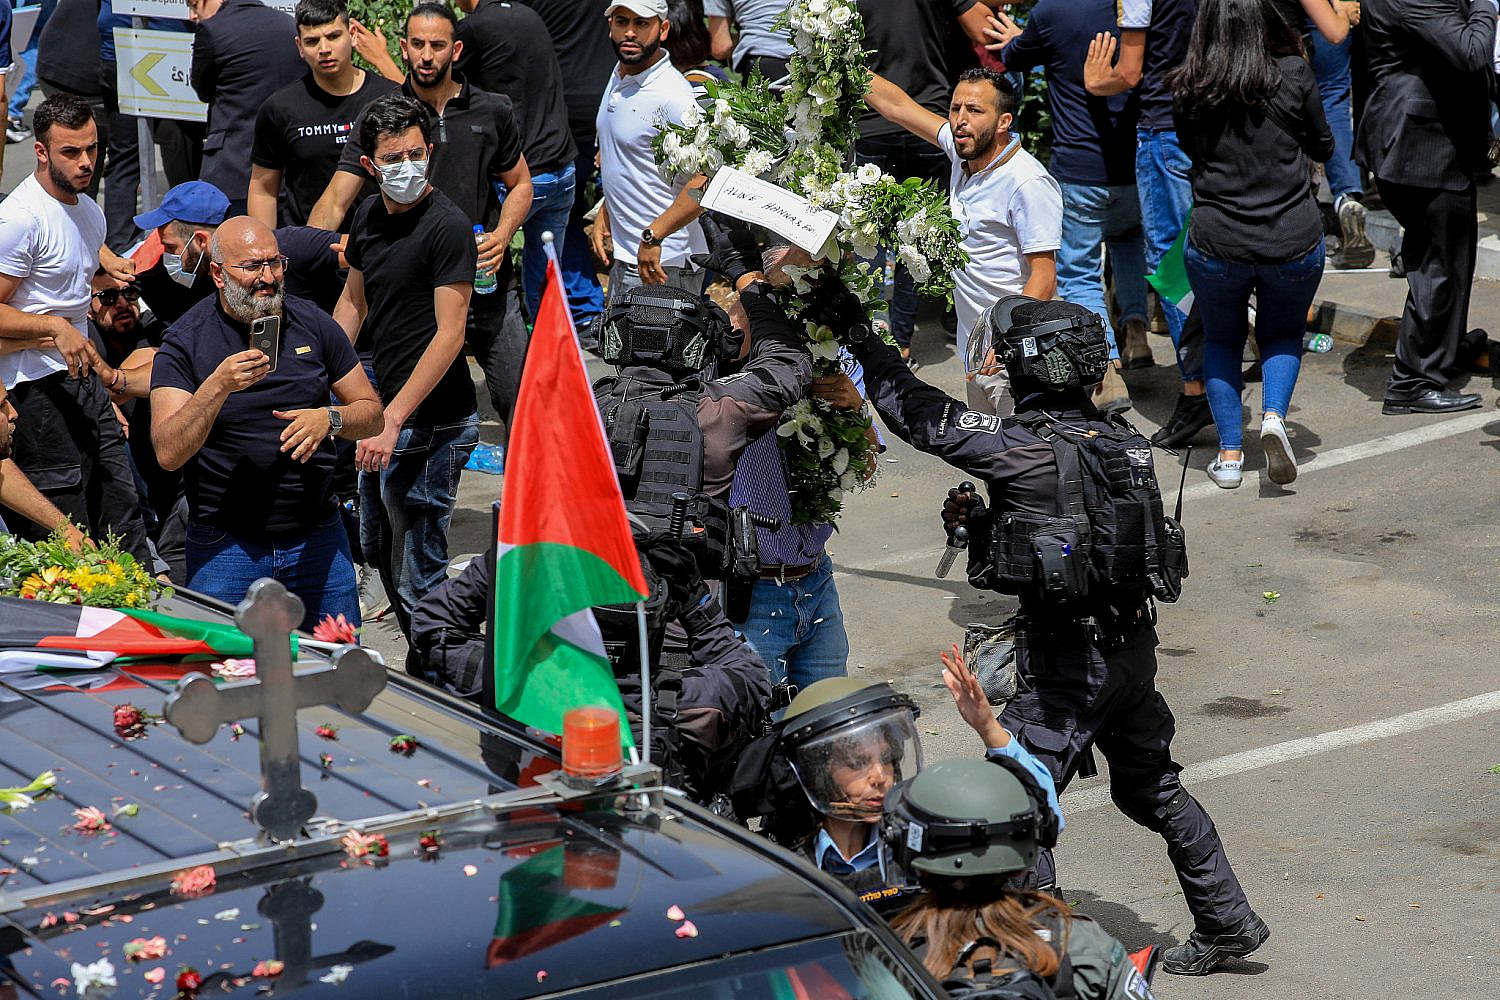 Mourners gather for the funeral procession of Al Jazeera journalist Shireen Abu Akleh in Jerusalem's Old City, May 13, 2022. (Jamal Awadl/Flash90)